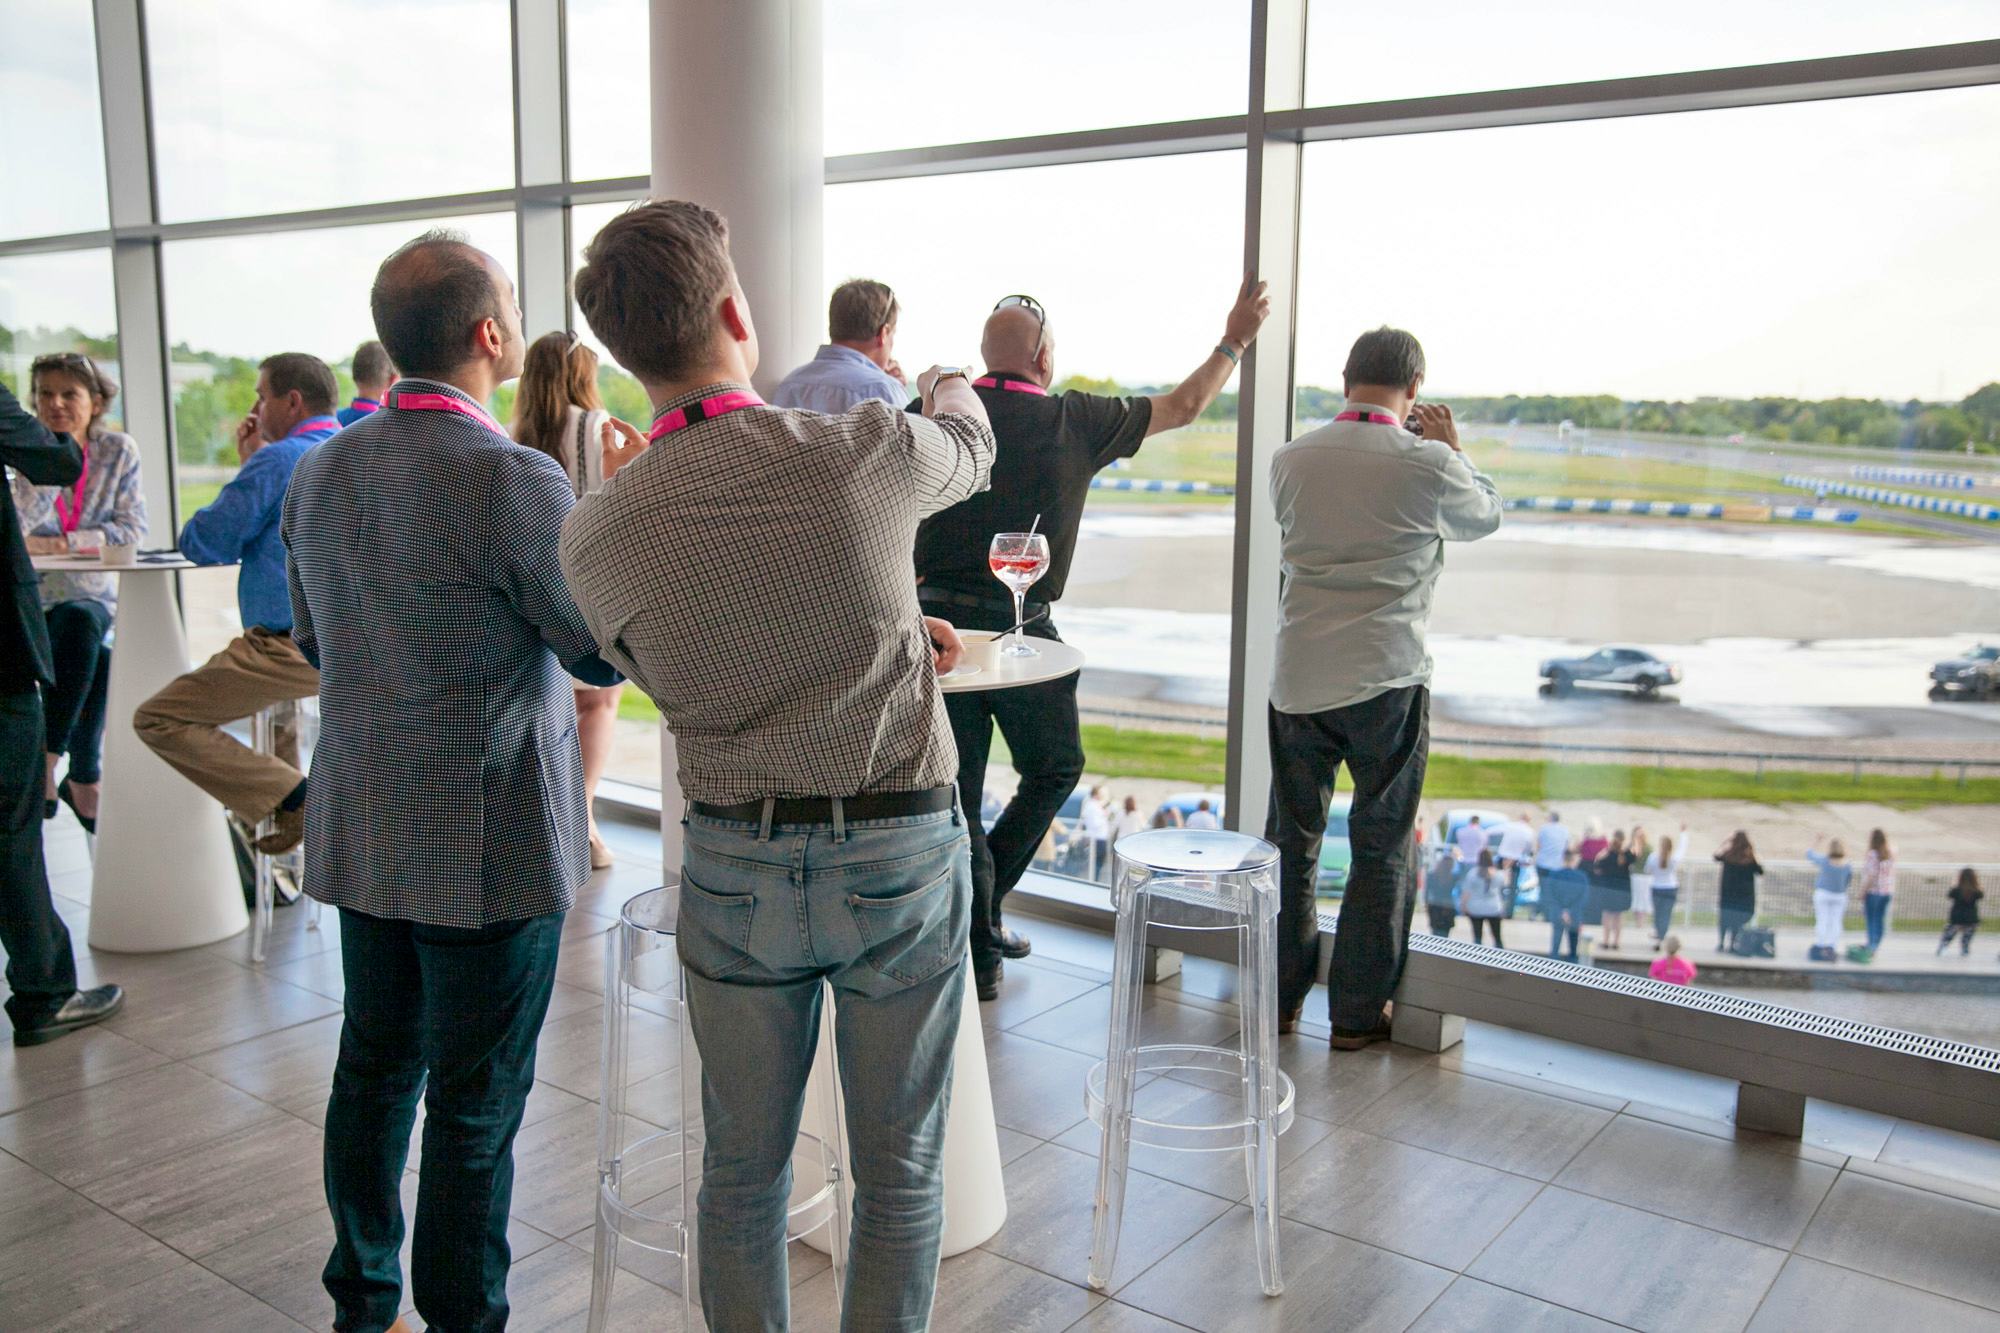 Event review The Summer Showcase at Mercedes Benz World 2017